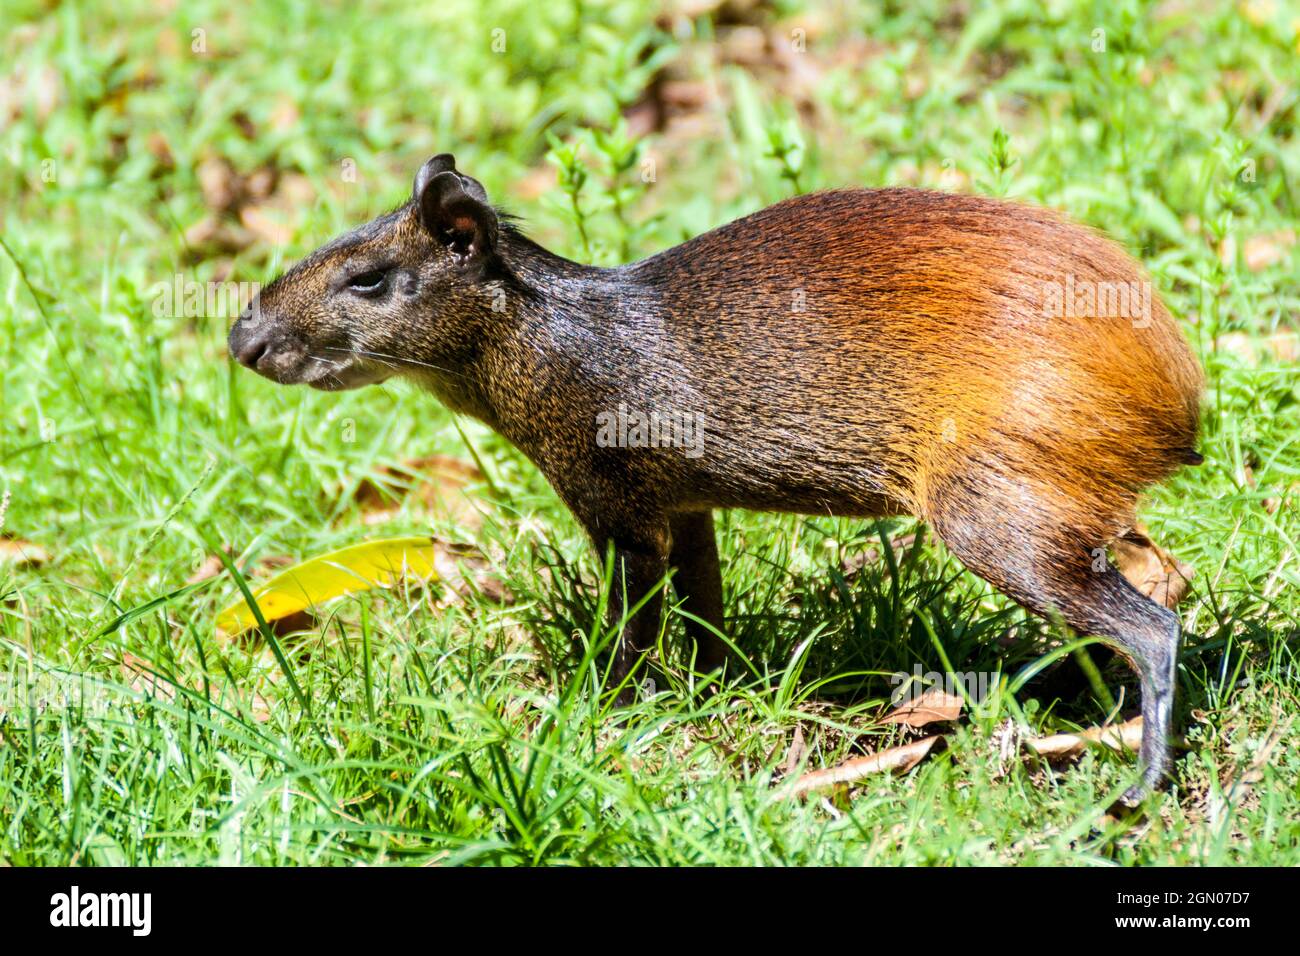 Agouti at Ile Royale, one of the islands of Iles du Salut (Islands of Salvation) in French Guiana Stock Photo